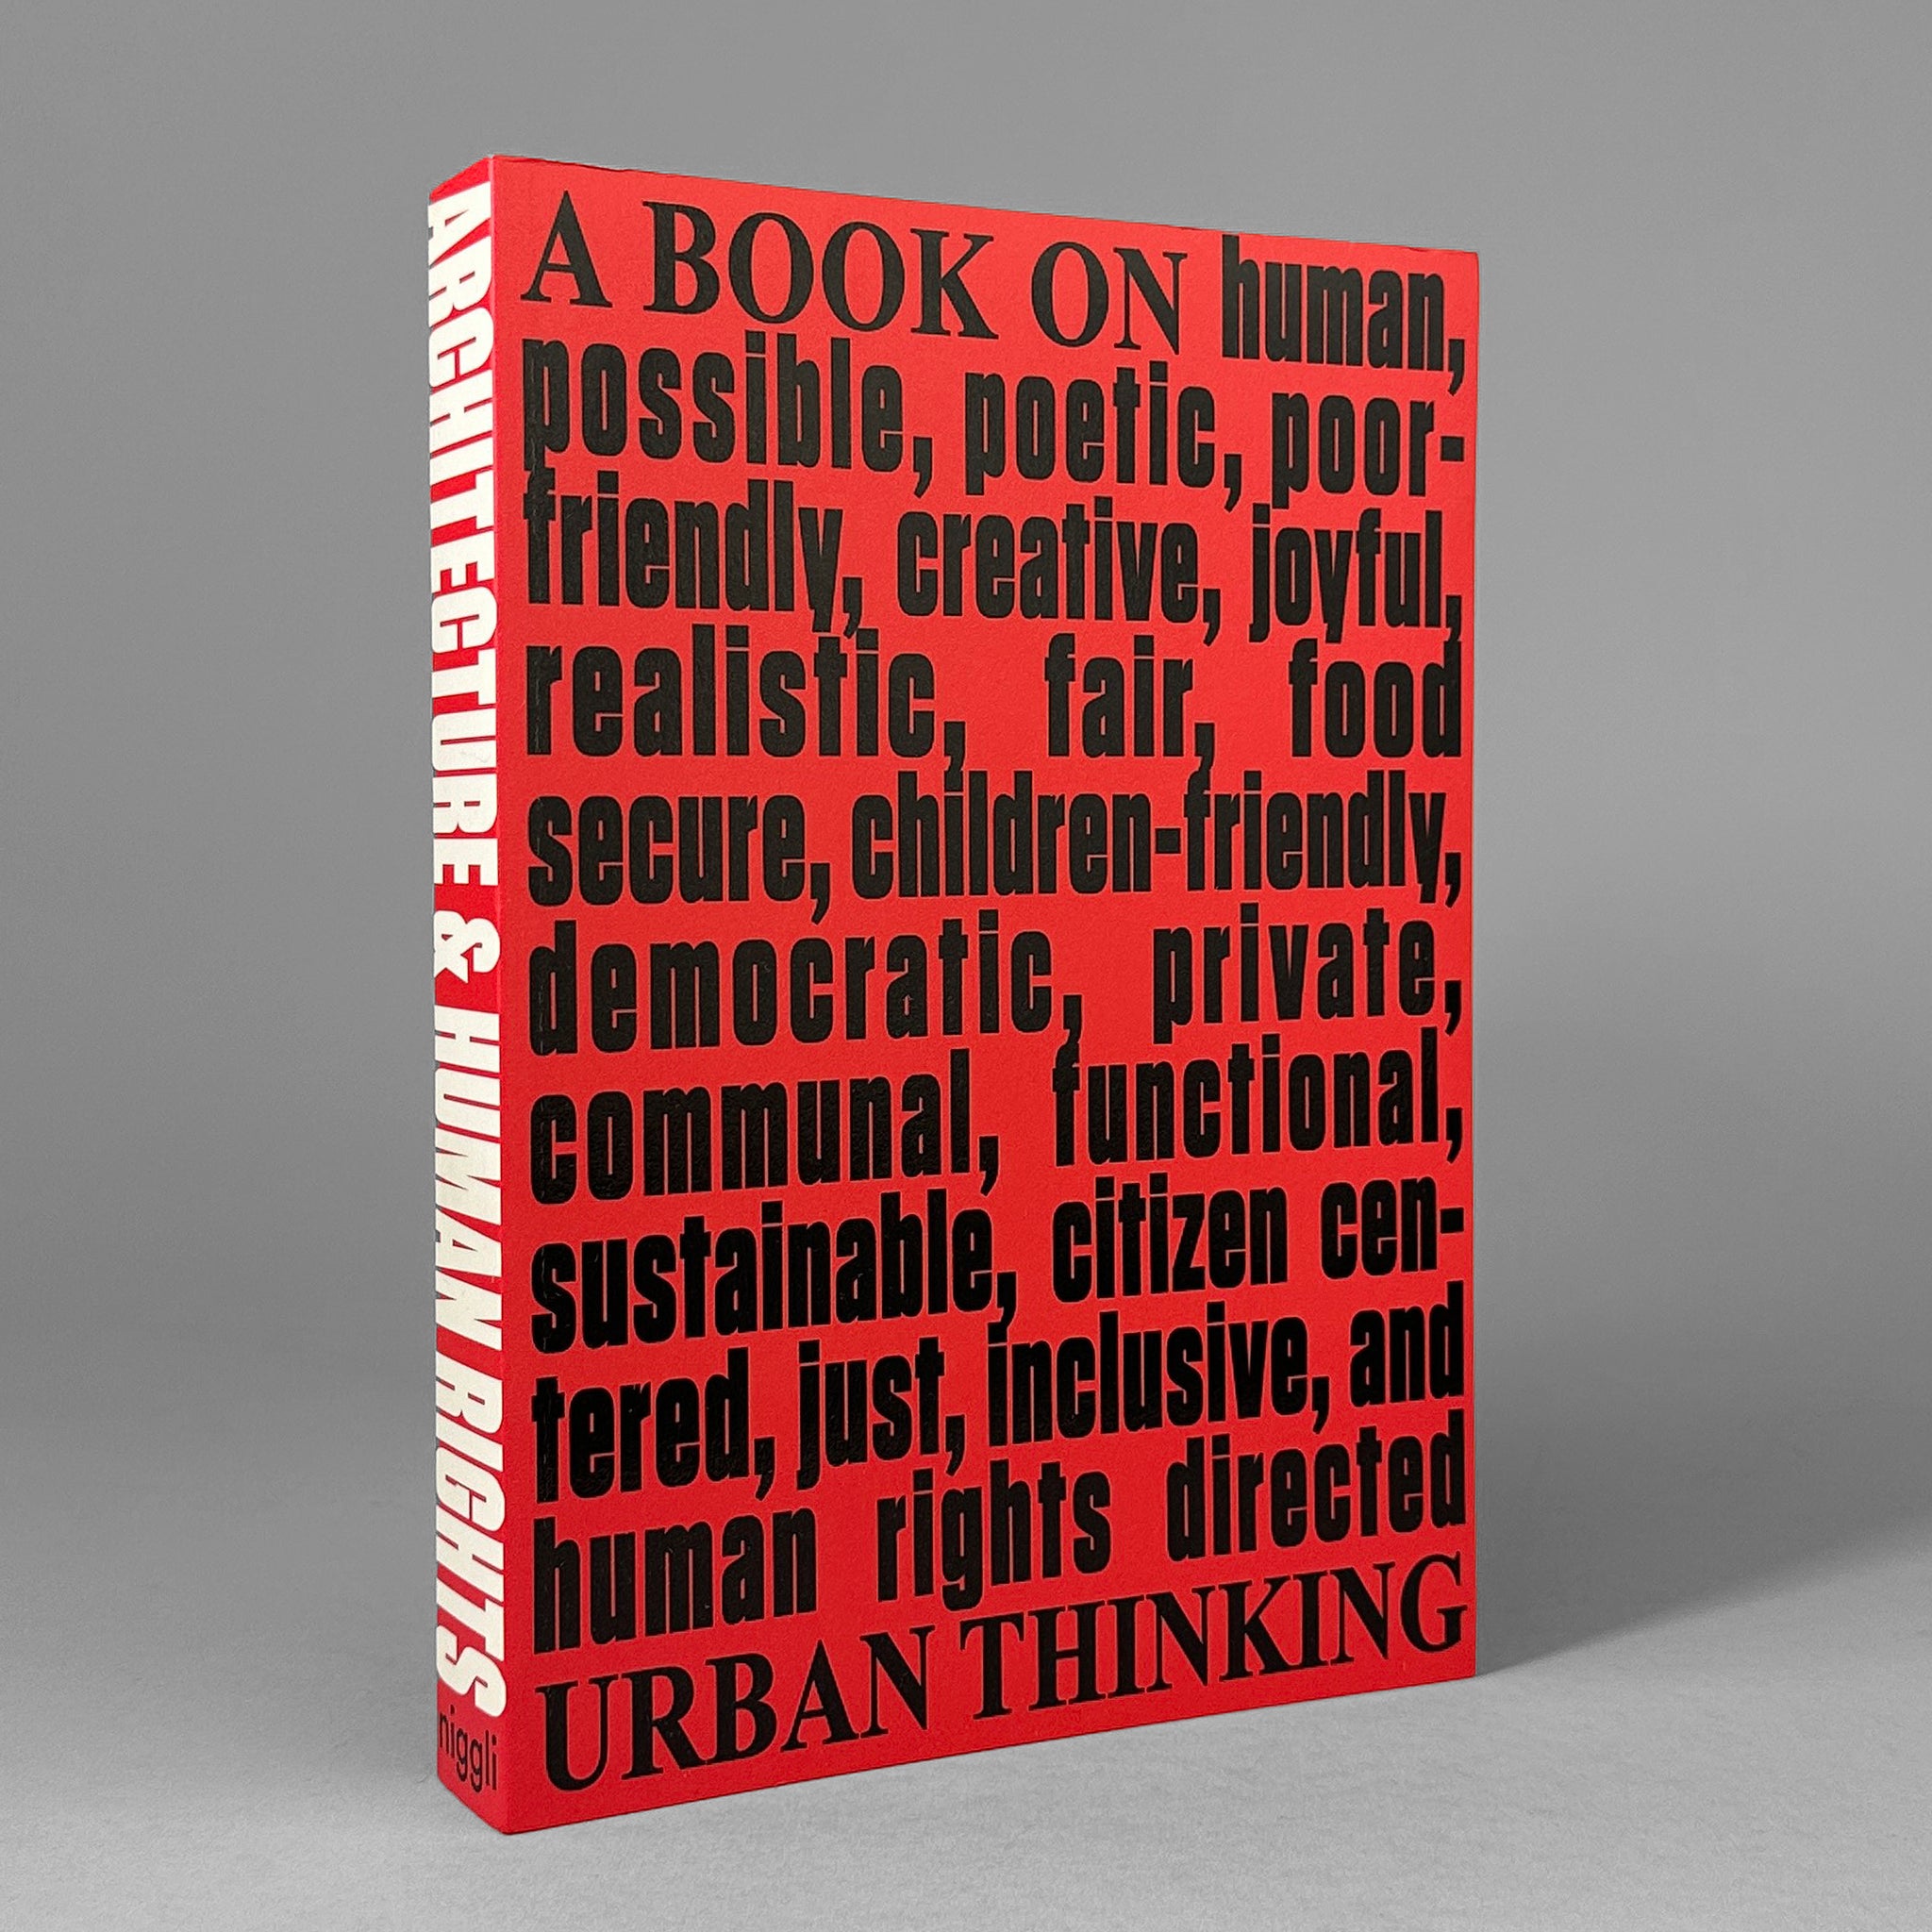 Architecture & Human Rights: A Book on Urban Thinking